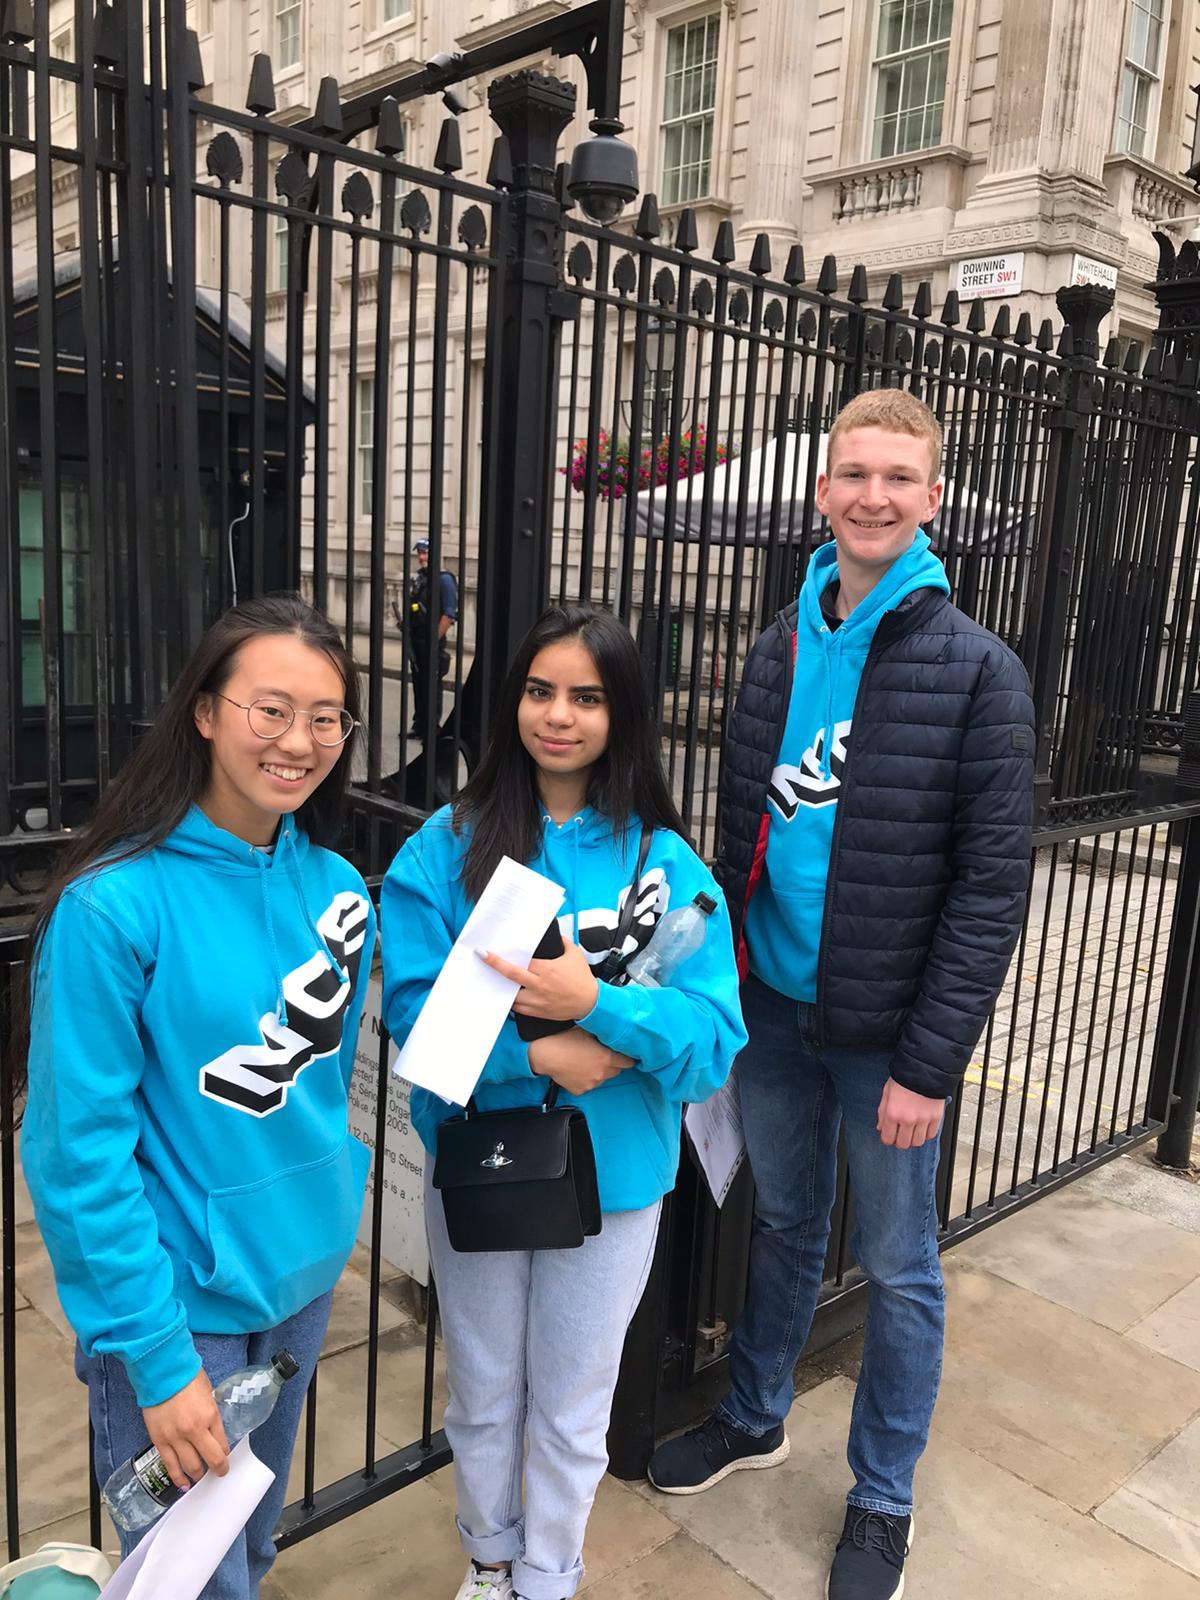 Elly Hong, Shamza Butt and Tom Jackson attended a BBQ reception at 10 Downing Street to thank their efforts for volunteering with NCS